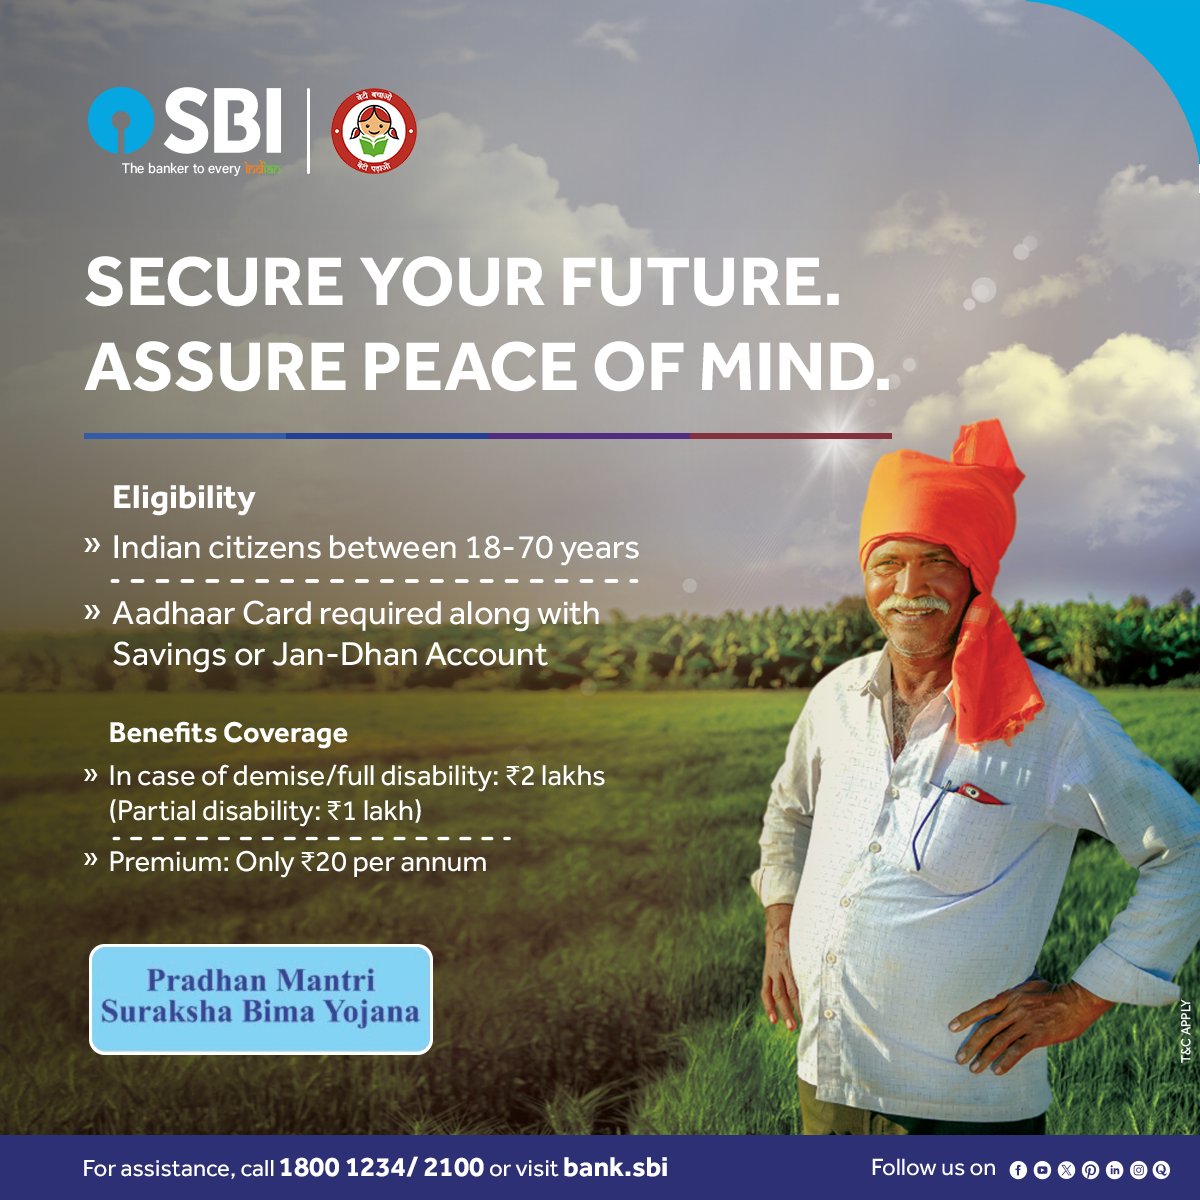 Presenting to you, the Pradhan Mantri Suraksha Bima Yojana, a scheme designed to provide financial protection and peace of mind for all. With only ₹20 per annum, you can ensure your family's security and face life's uncertainties with confidence. Join us in securing your future…